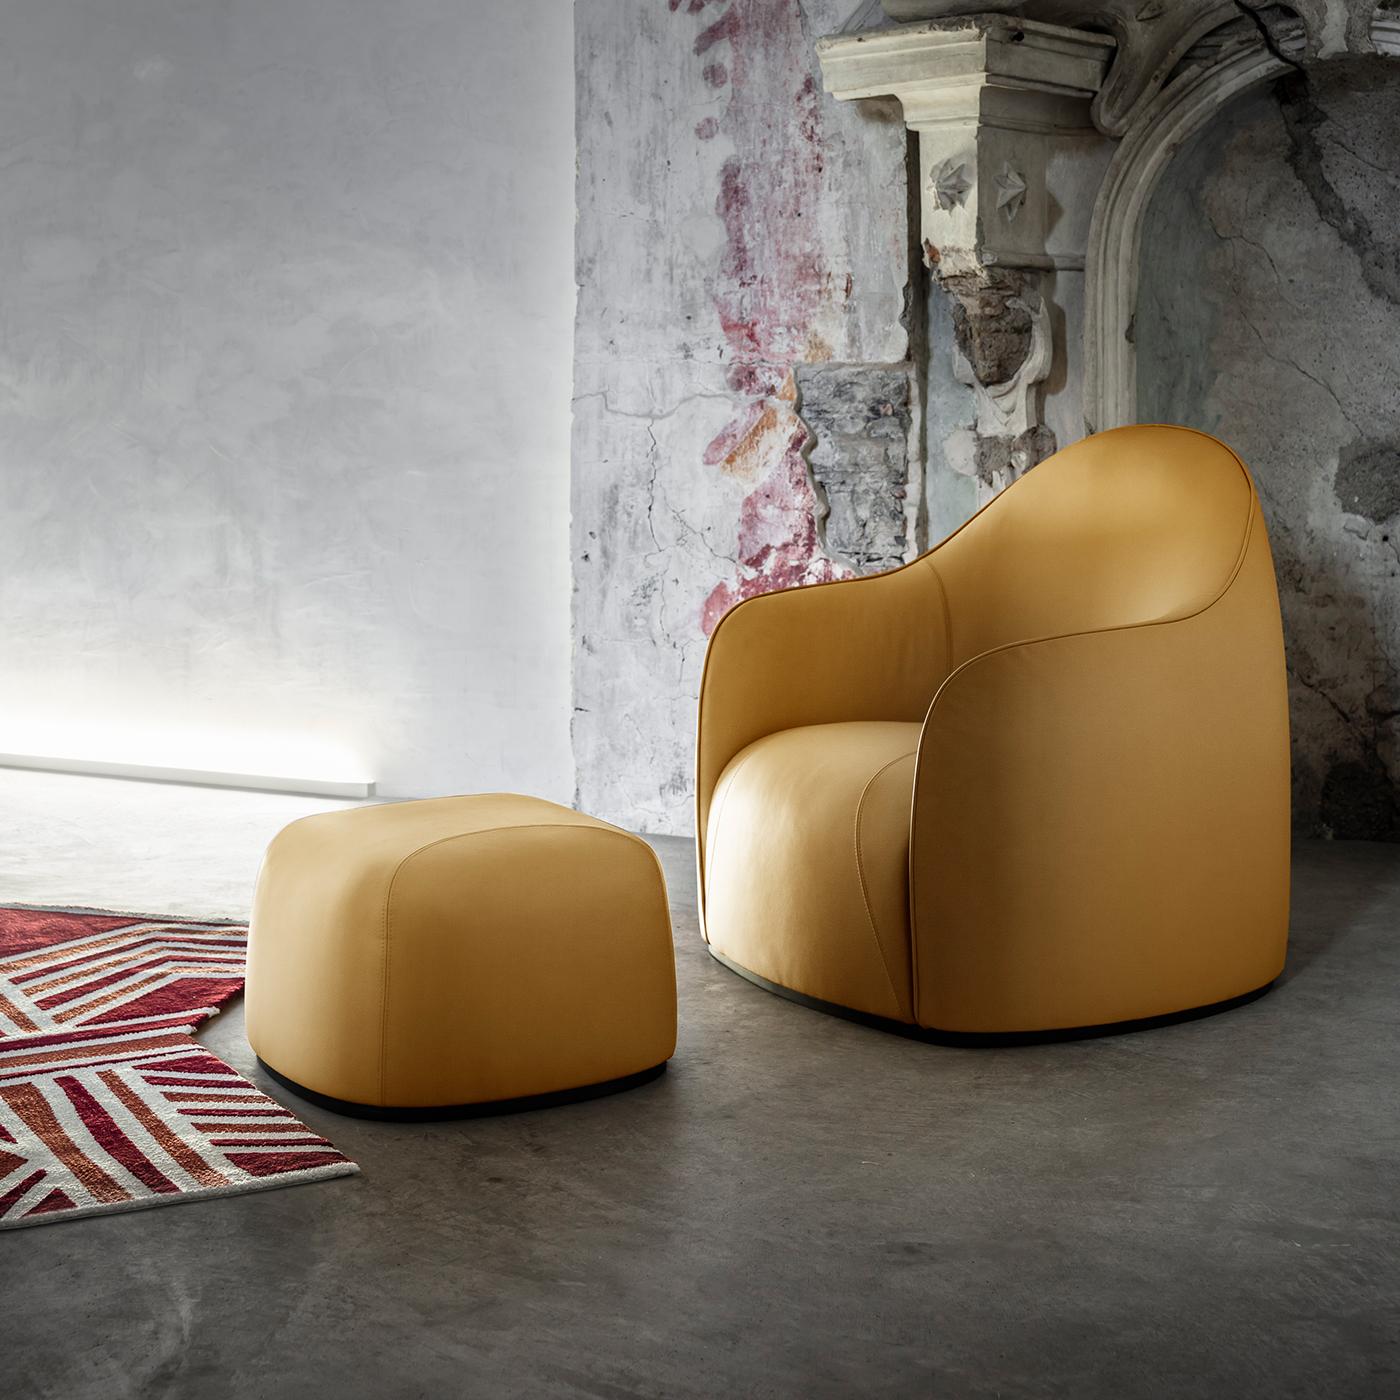 Italian Sweet Set of Mustard Armchair and Pouf by Elisa Giovannoni For Sale